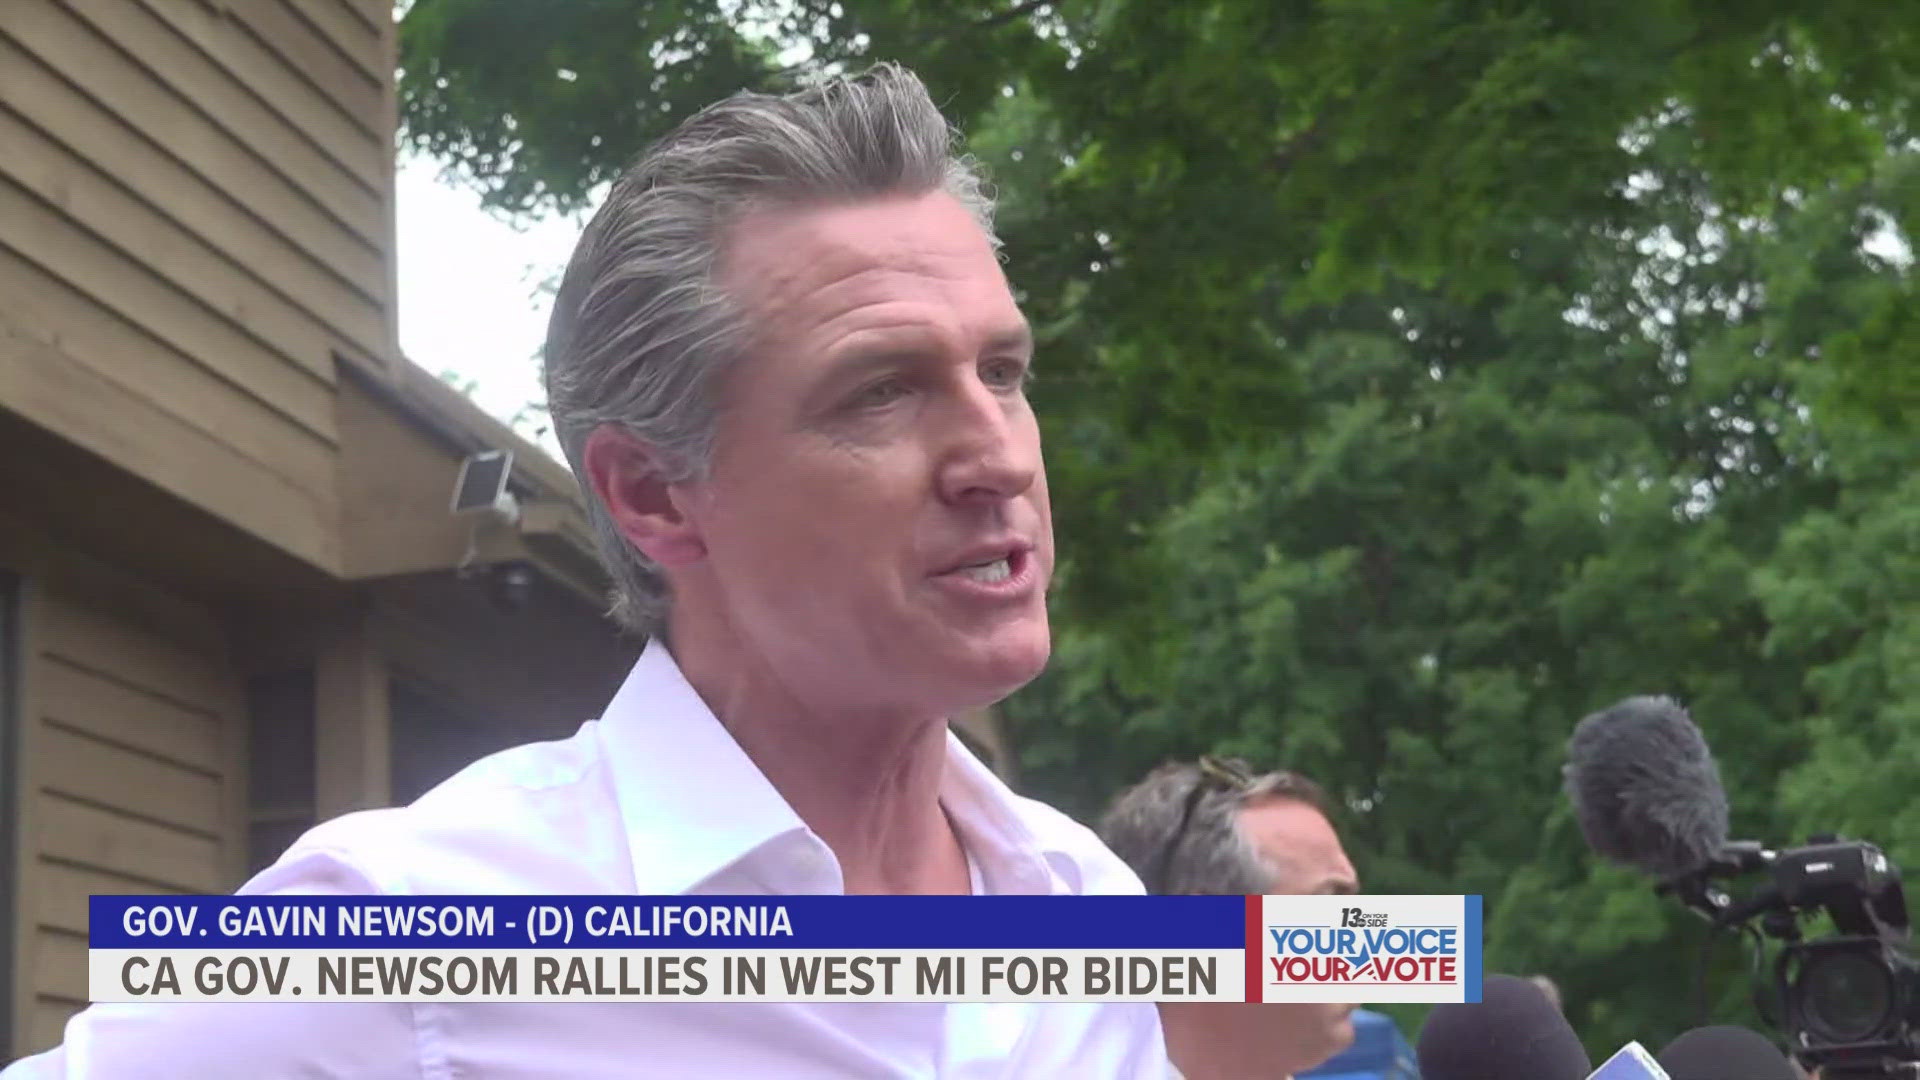 Newsom made sure to cite many of the successes of the Biden Administration over the last three and a half years during his visit.